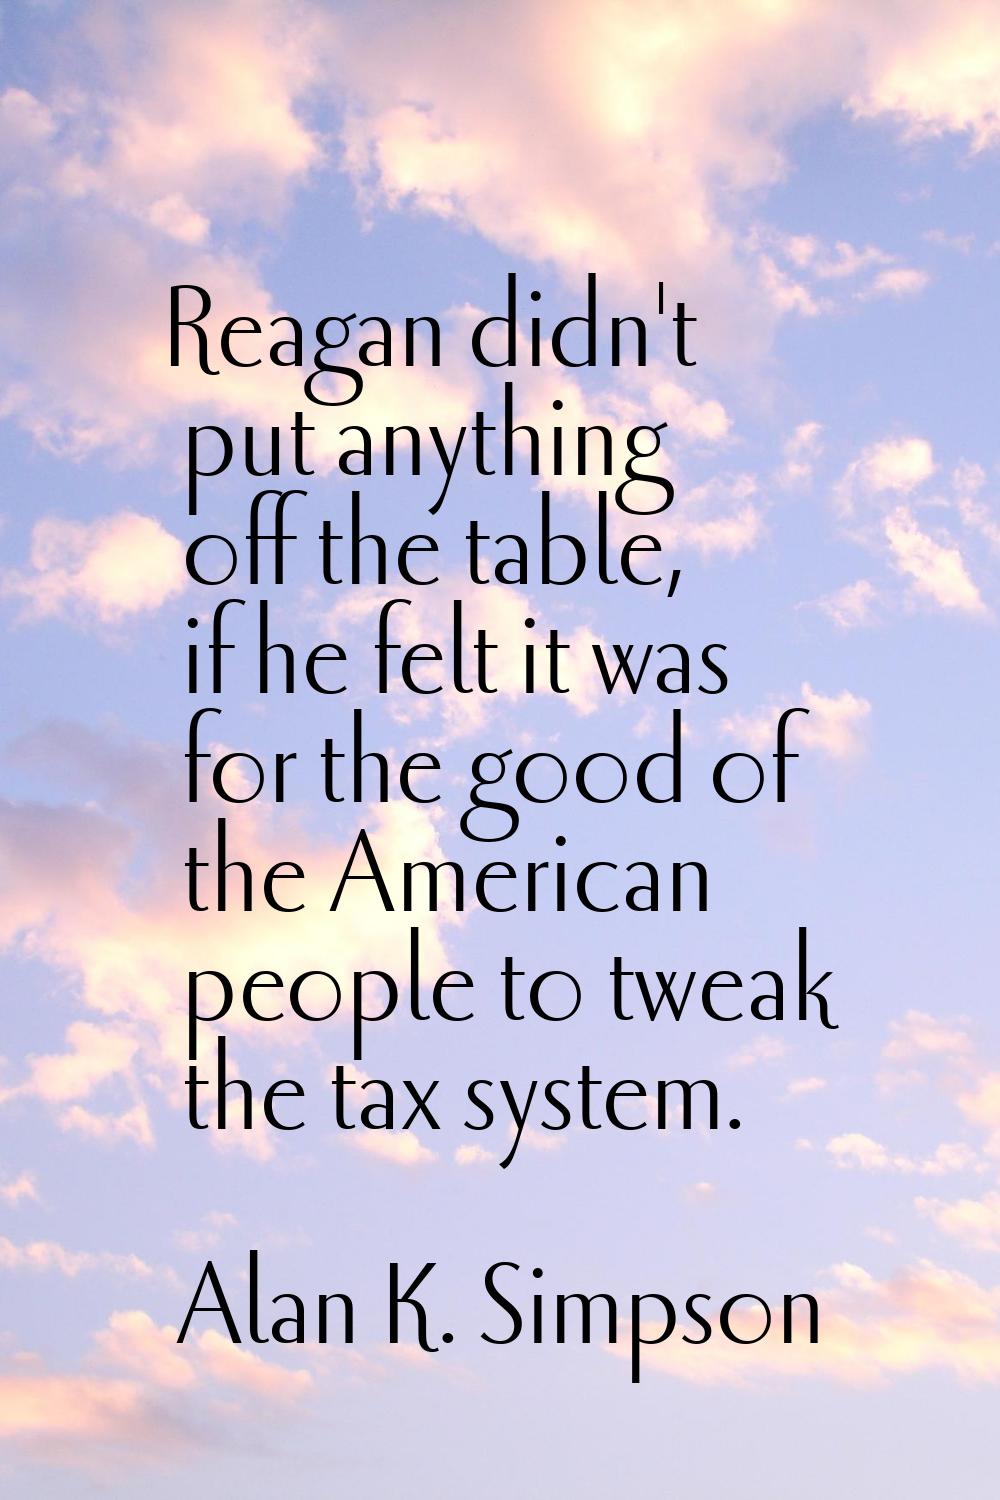 Reagan didn't put anything off the table, if he felt it was for the good of the American people to 